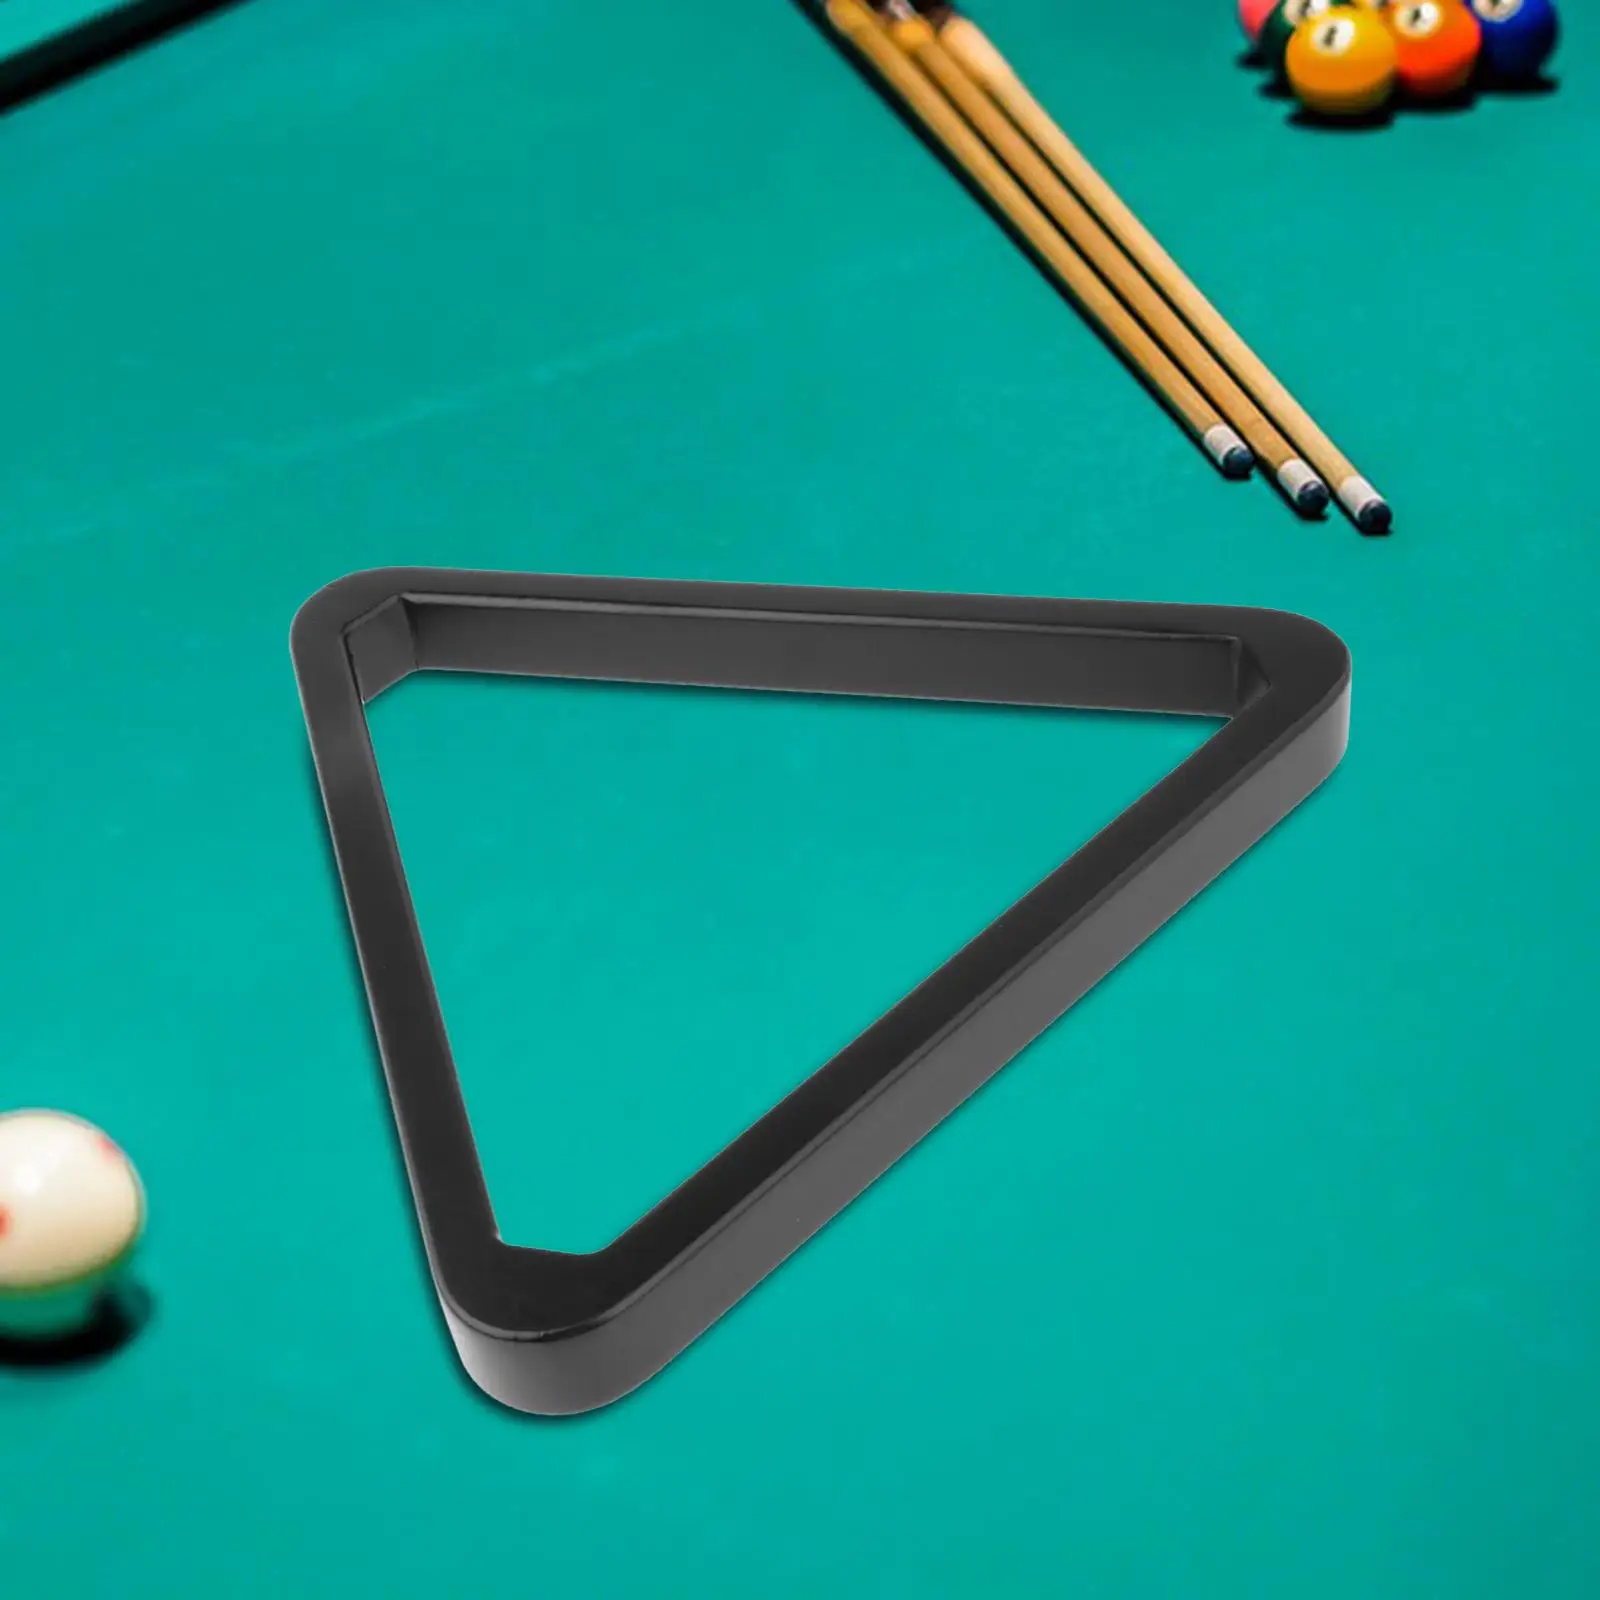 Solid Wood Billiard Triangle Ball Rack for 57.2mm Pool Balls Snooker Accessories Practice Billiards Table Training Pool Rack